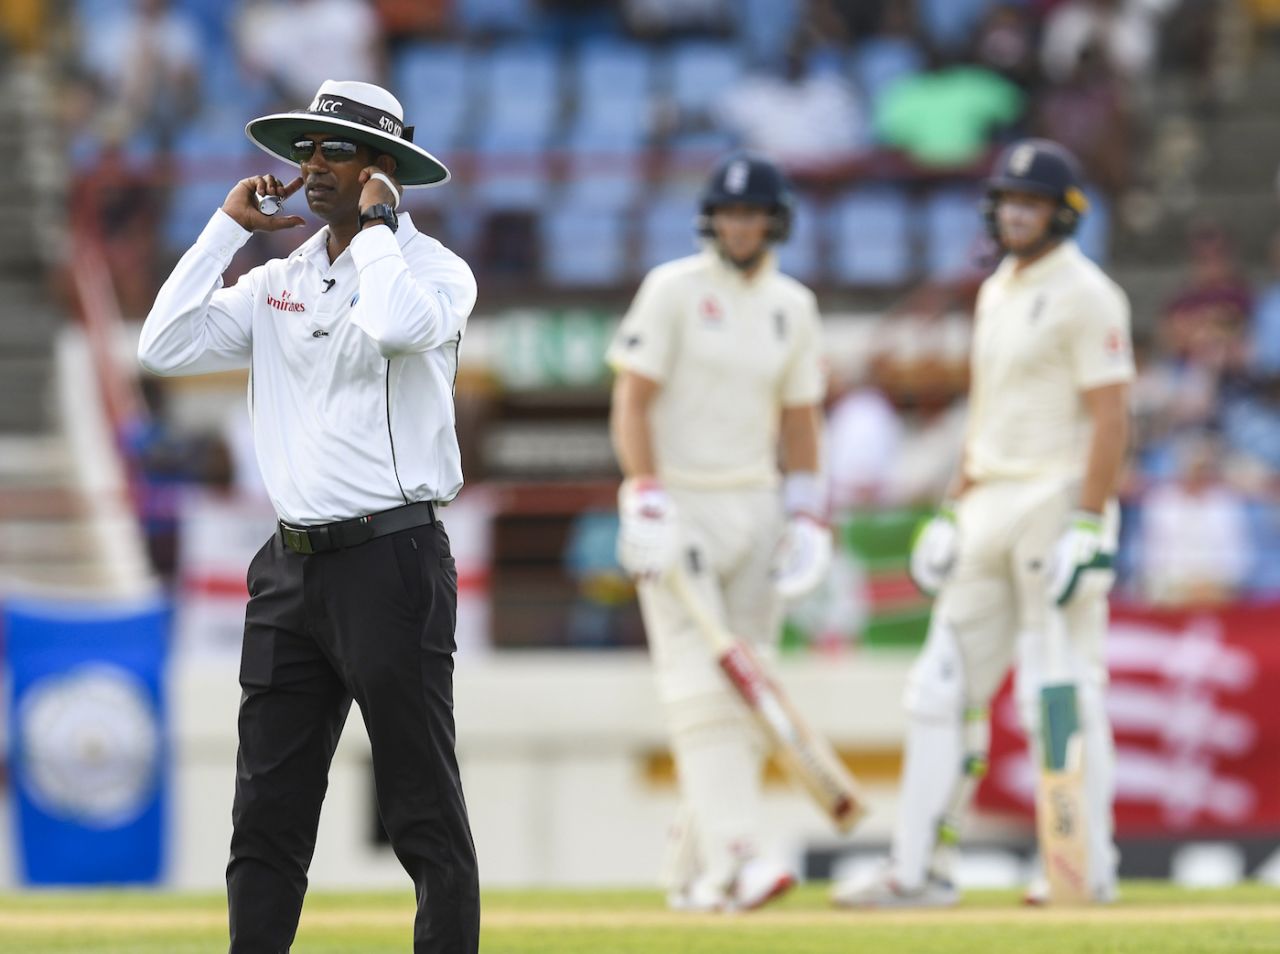 Kumar Dharmasena signals that he can't hear the TV umpire, West Indies v England, 3rd Test, Gros Islet, 3rd day, February 11, 2019